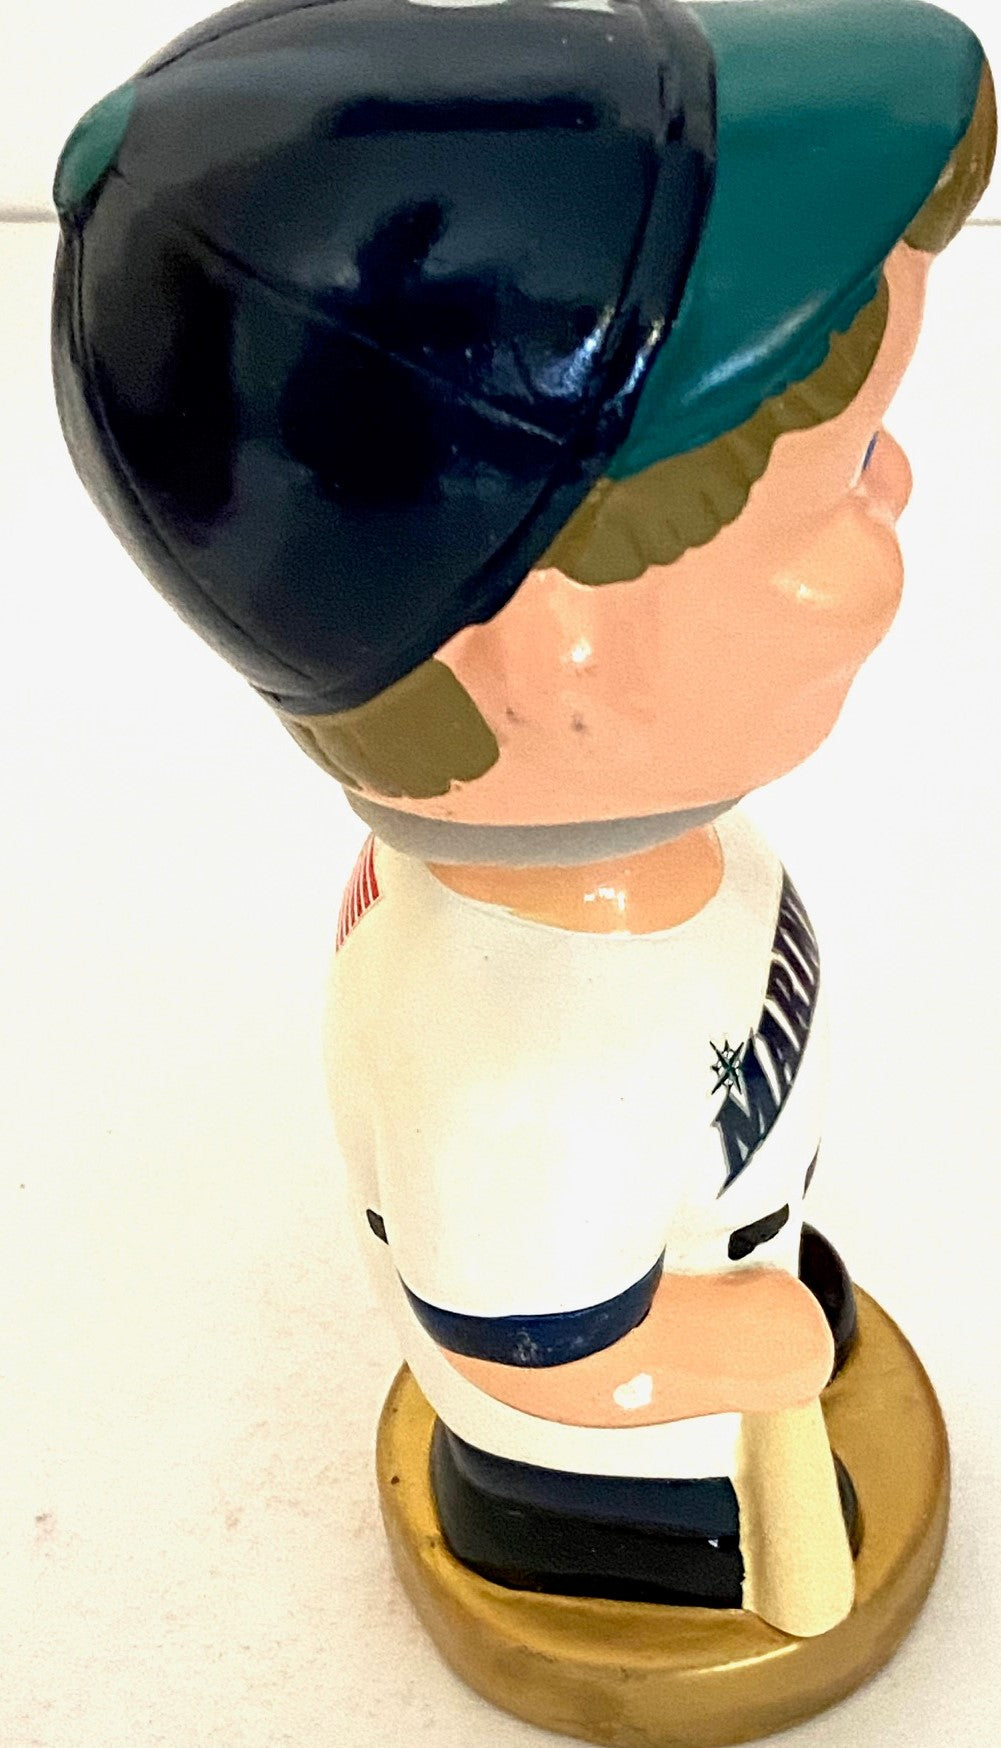 Seattle Mariners 2002 MLB "Boy" Bobblehead (New/2 Blemishes) by Twins Enterprise